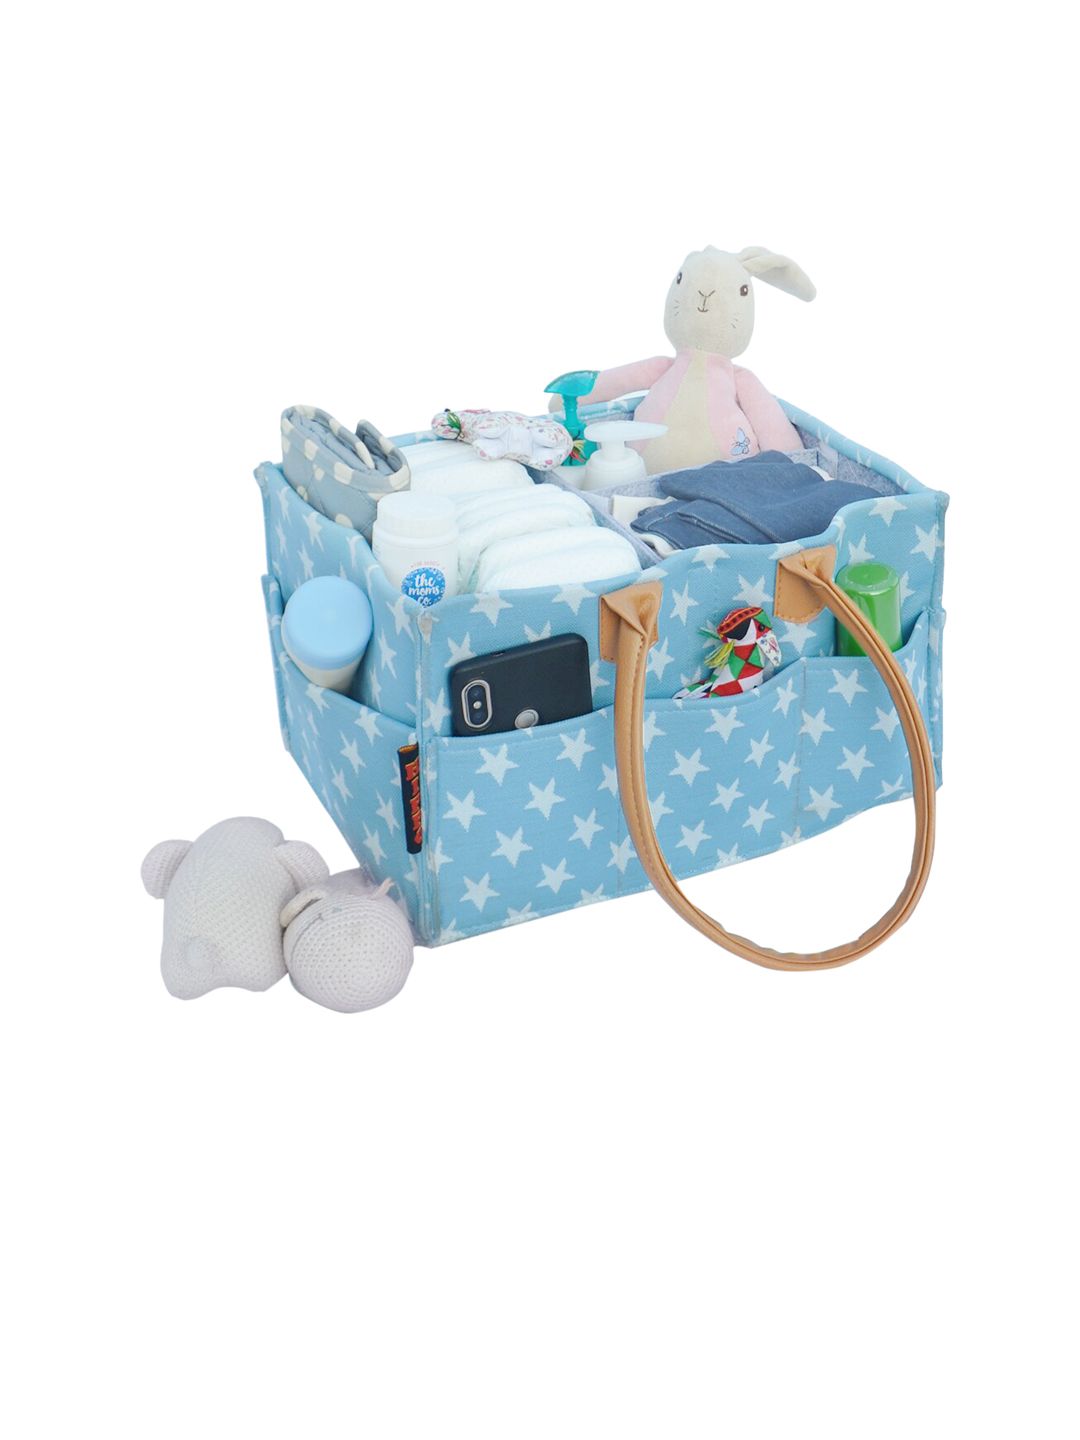 Hippo Infants Blue Diaper Caddy Bag Price in India